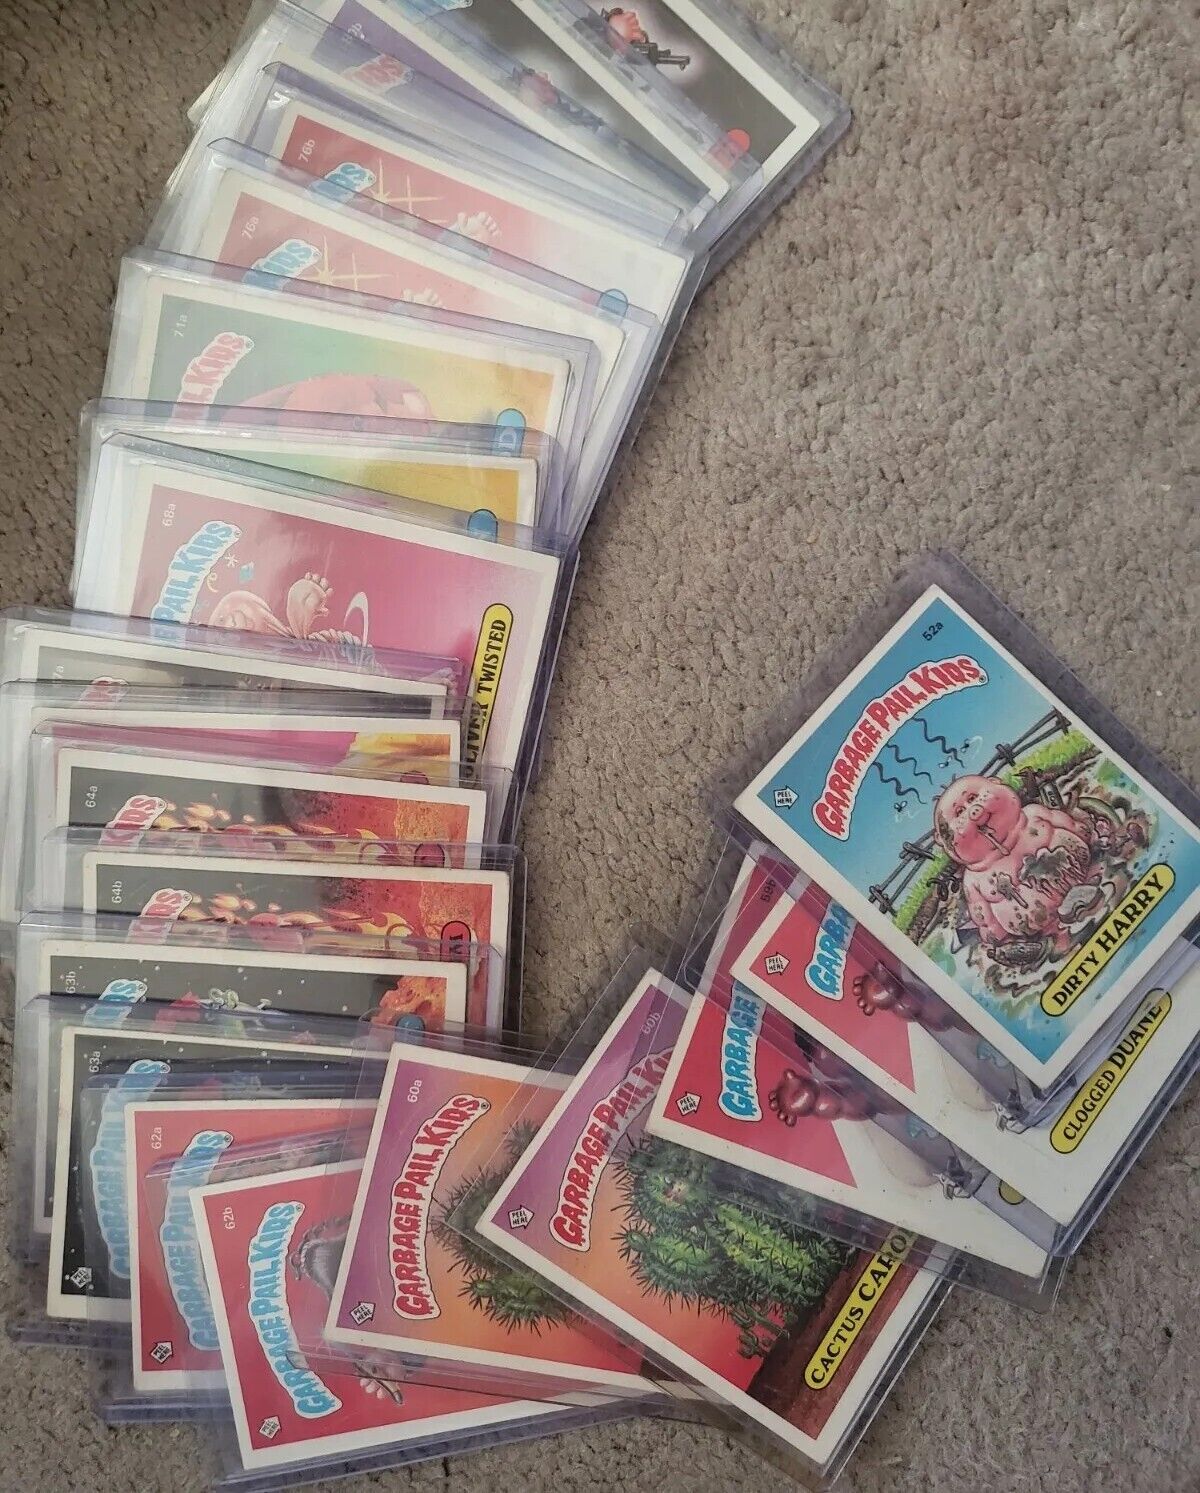 Garbage Pail Kids 25 Card Lot 1985/86  Series 2, 3, 4,5, 6 EXCELLENT CONDITION 